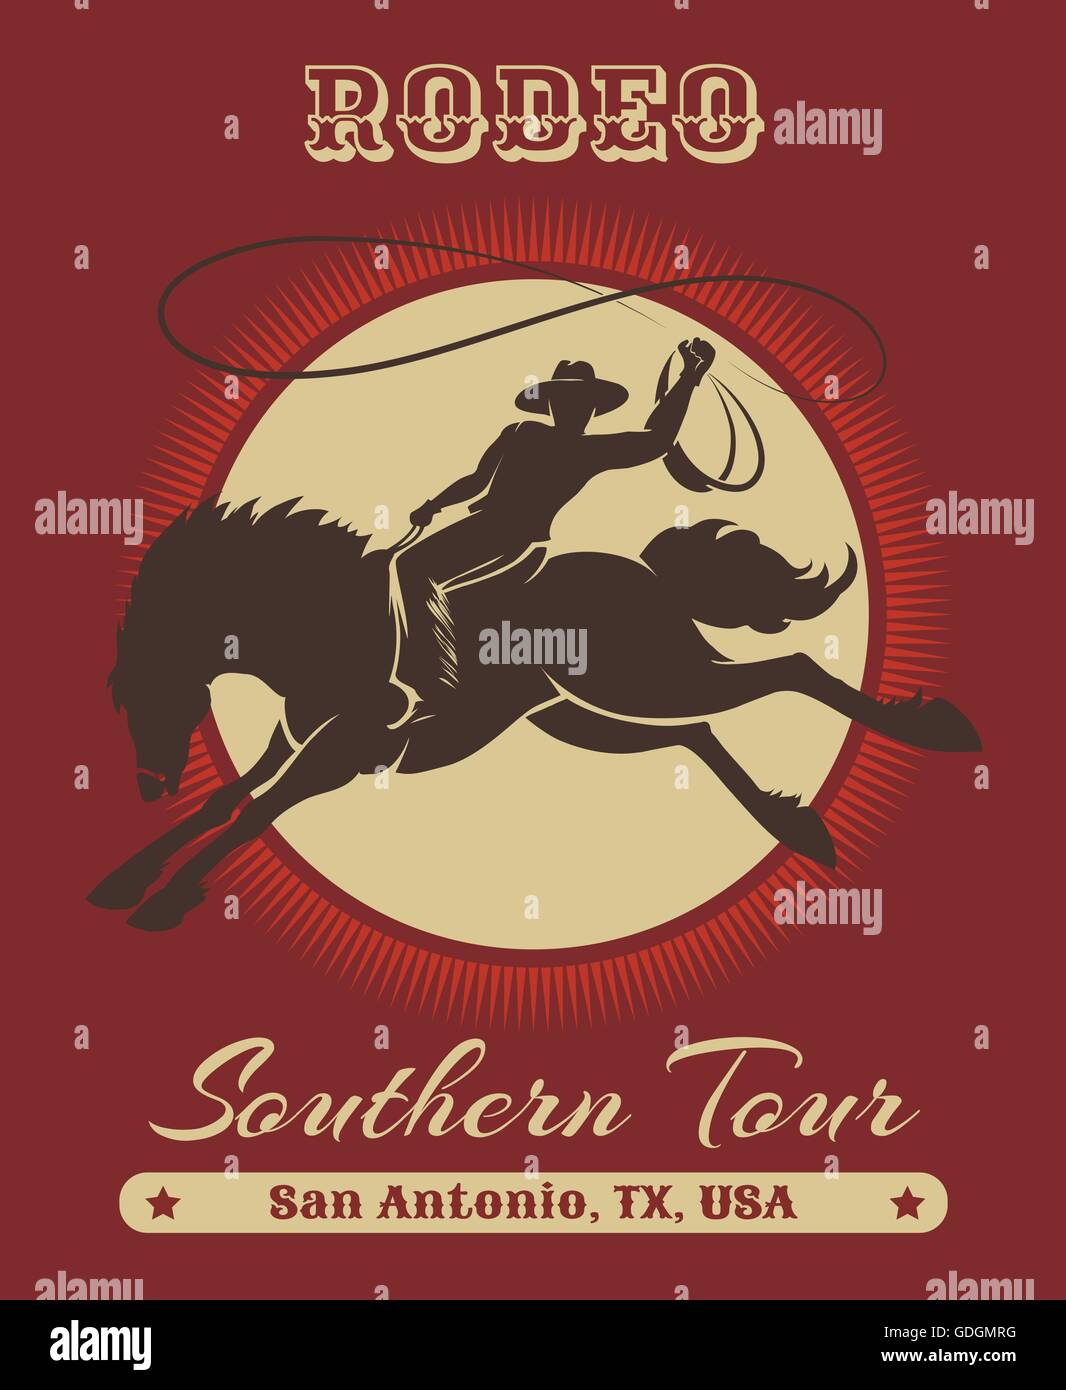 American Texas cowboy rodeo poster with retro typography. Free font used. Stock Vector